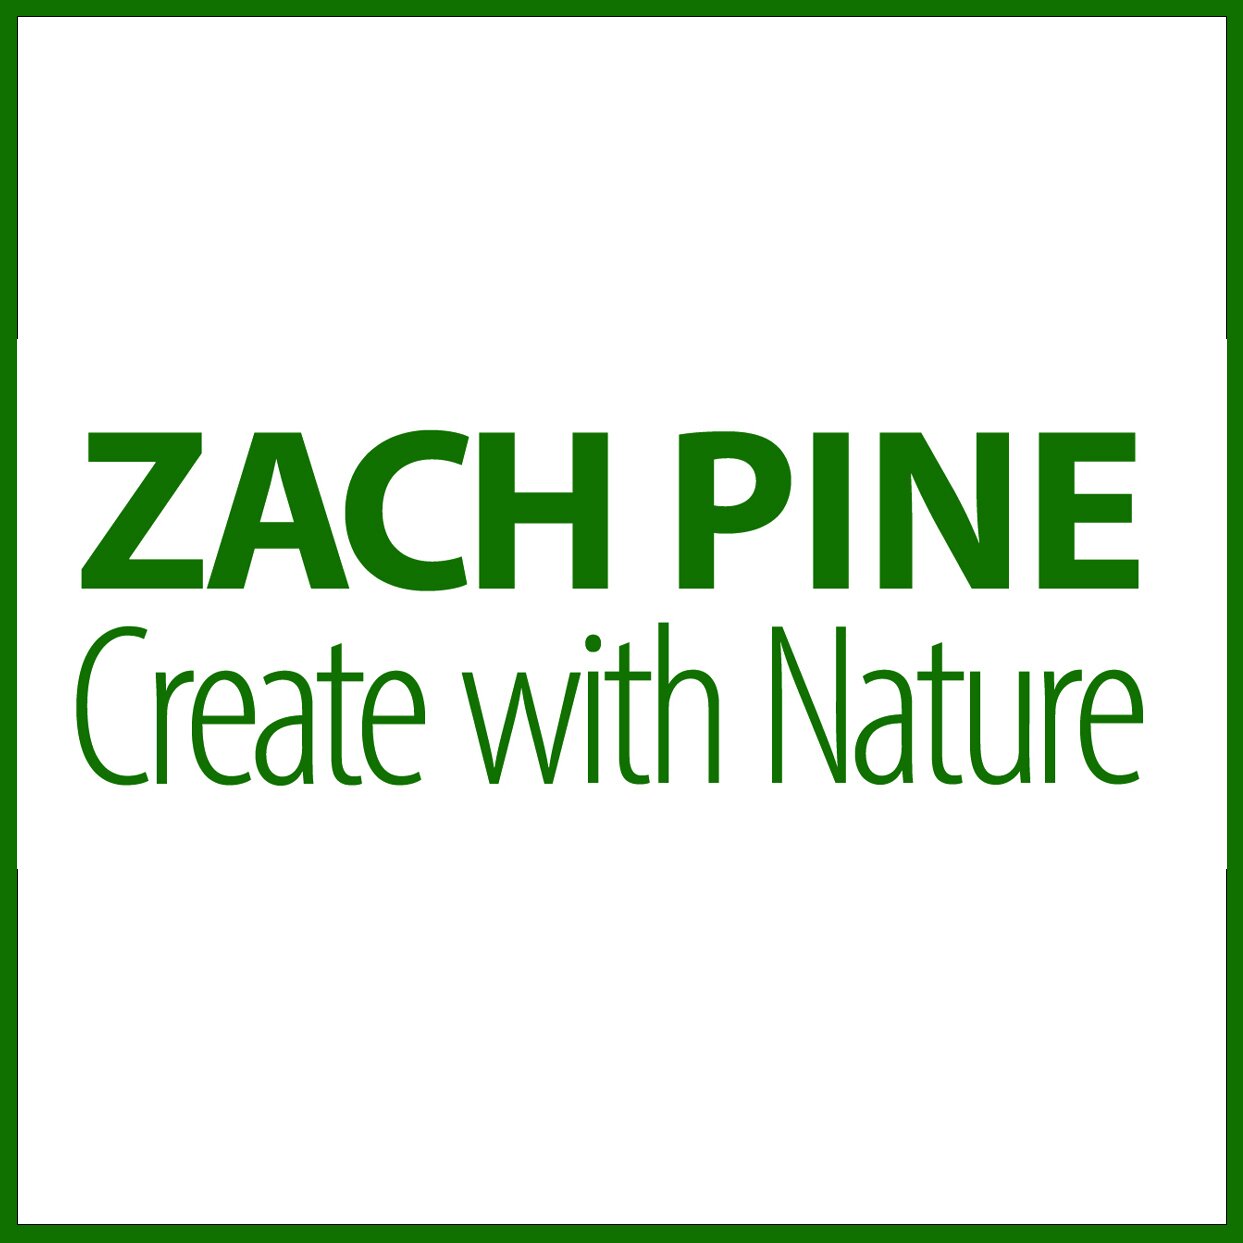 Zach Pine Create with Nature